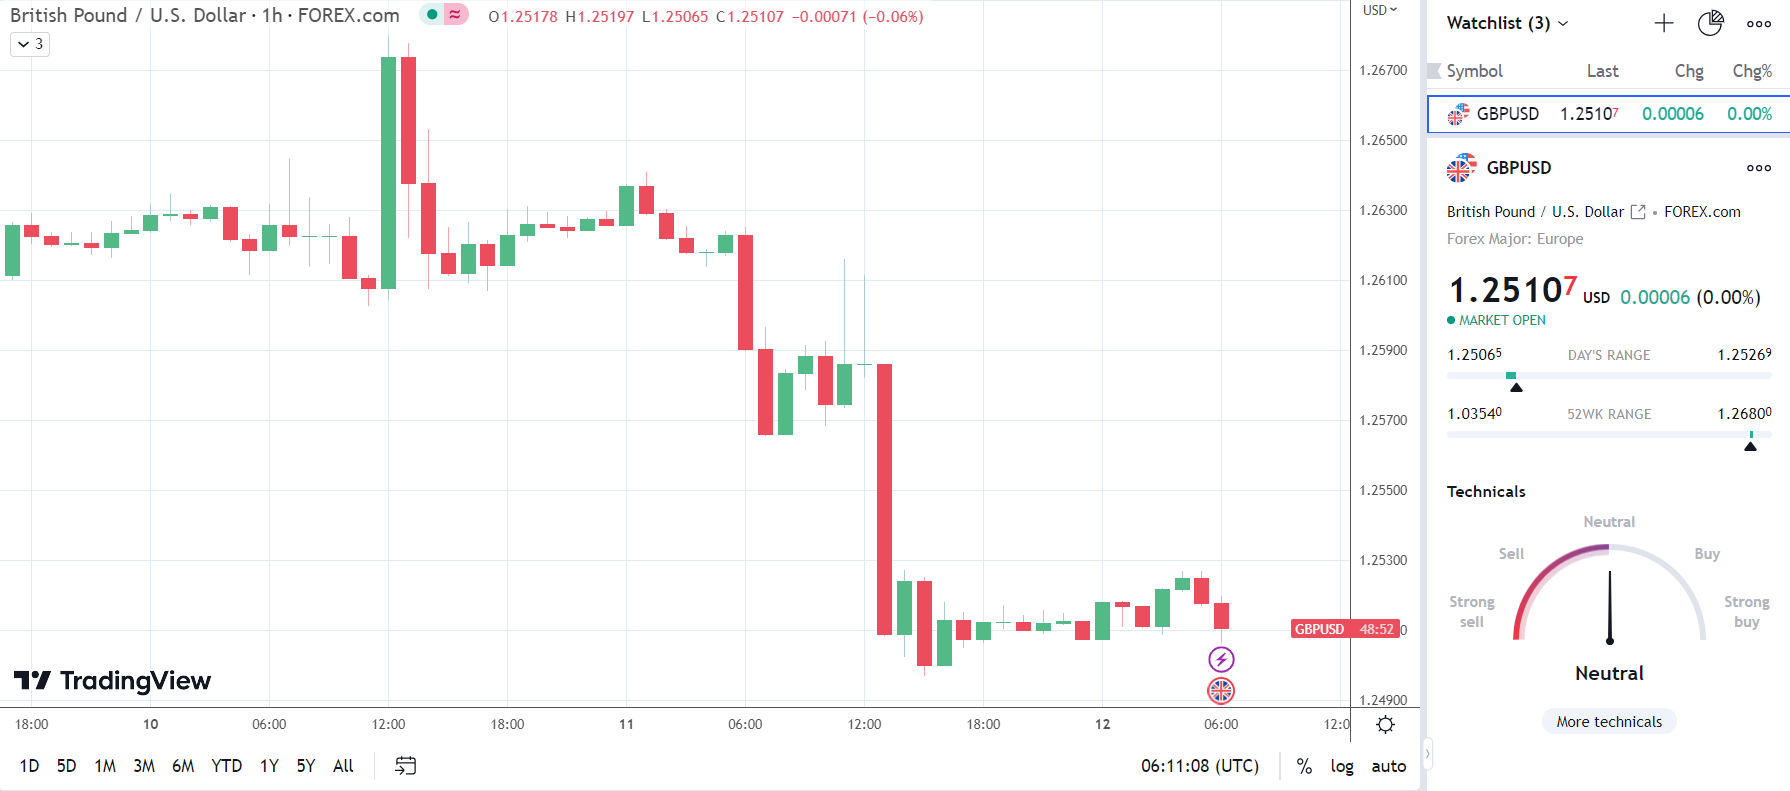 GBP/USD has bearish reaction to the GDP numbers.